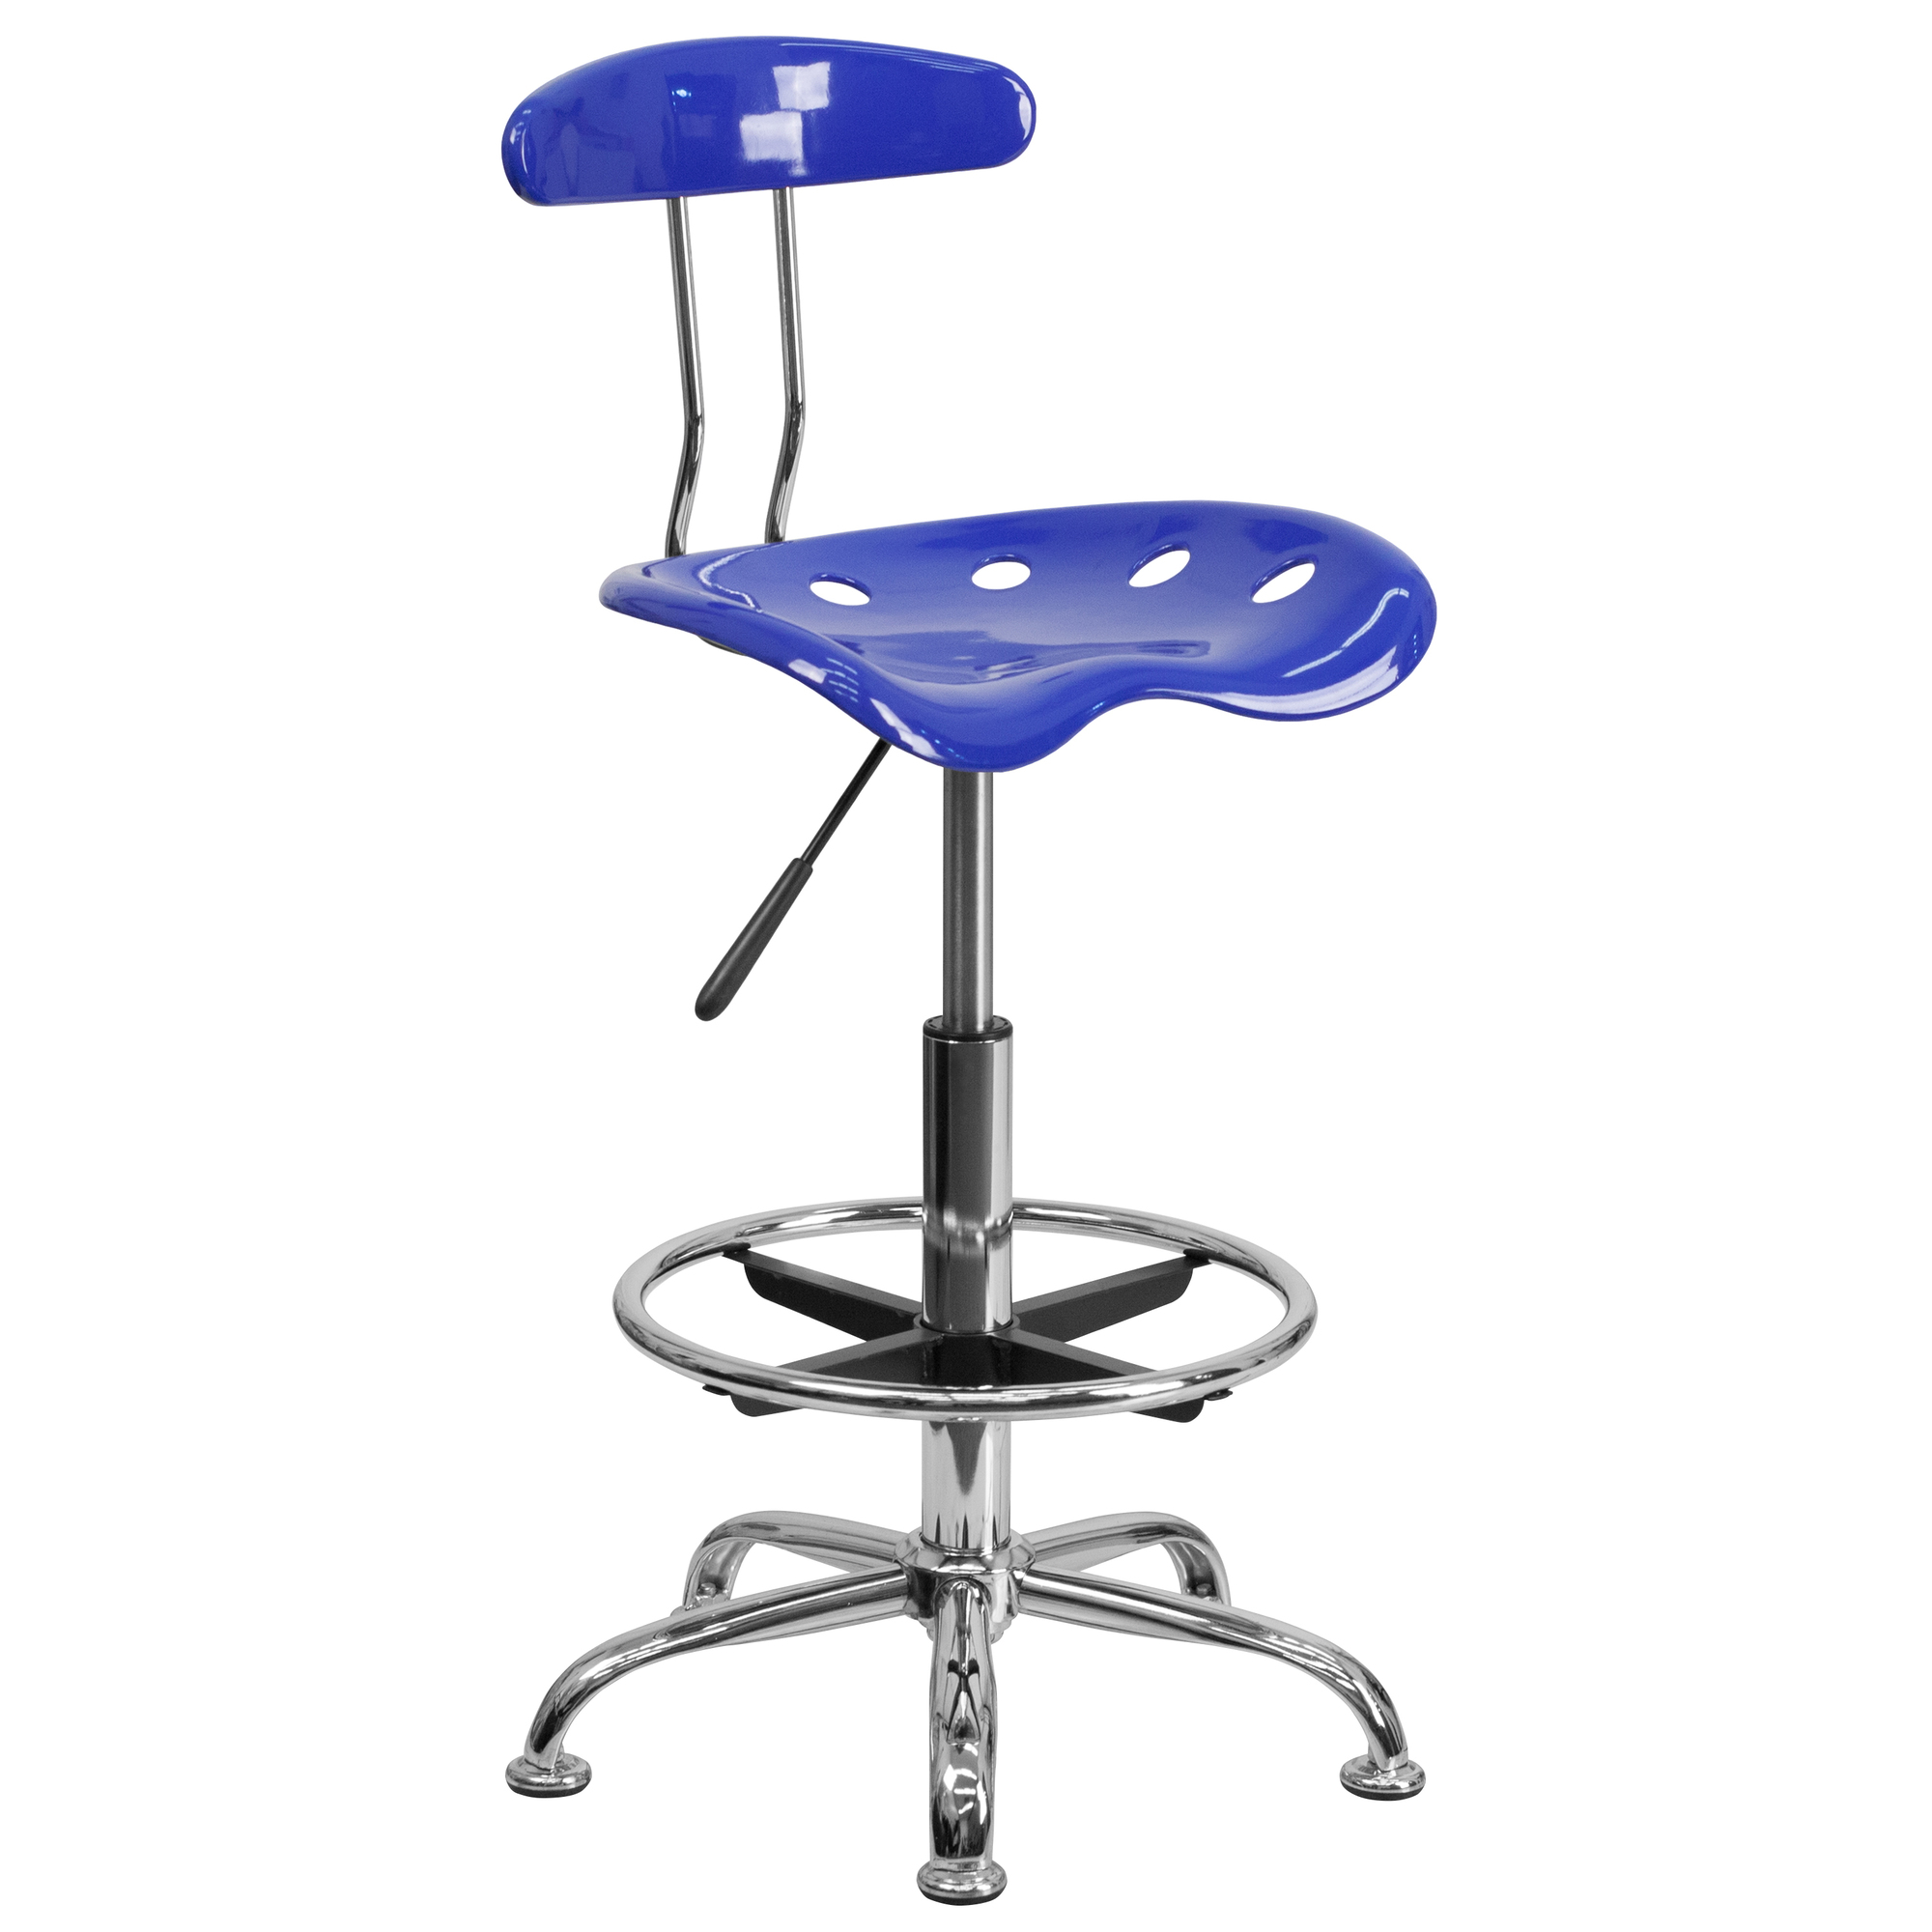 Flash Furniture, Vibrant Nautical Blue and Chrome Drafting Stool, Primary Color Blue, Included (qty.) 1, Model LF215NTCLBLUE